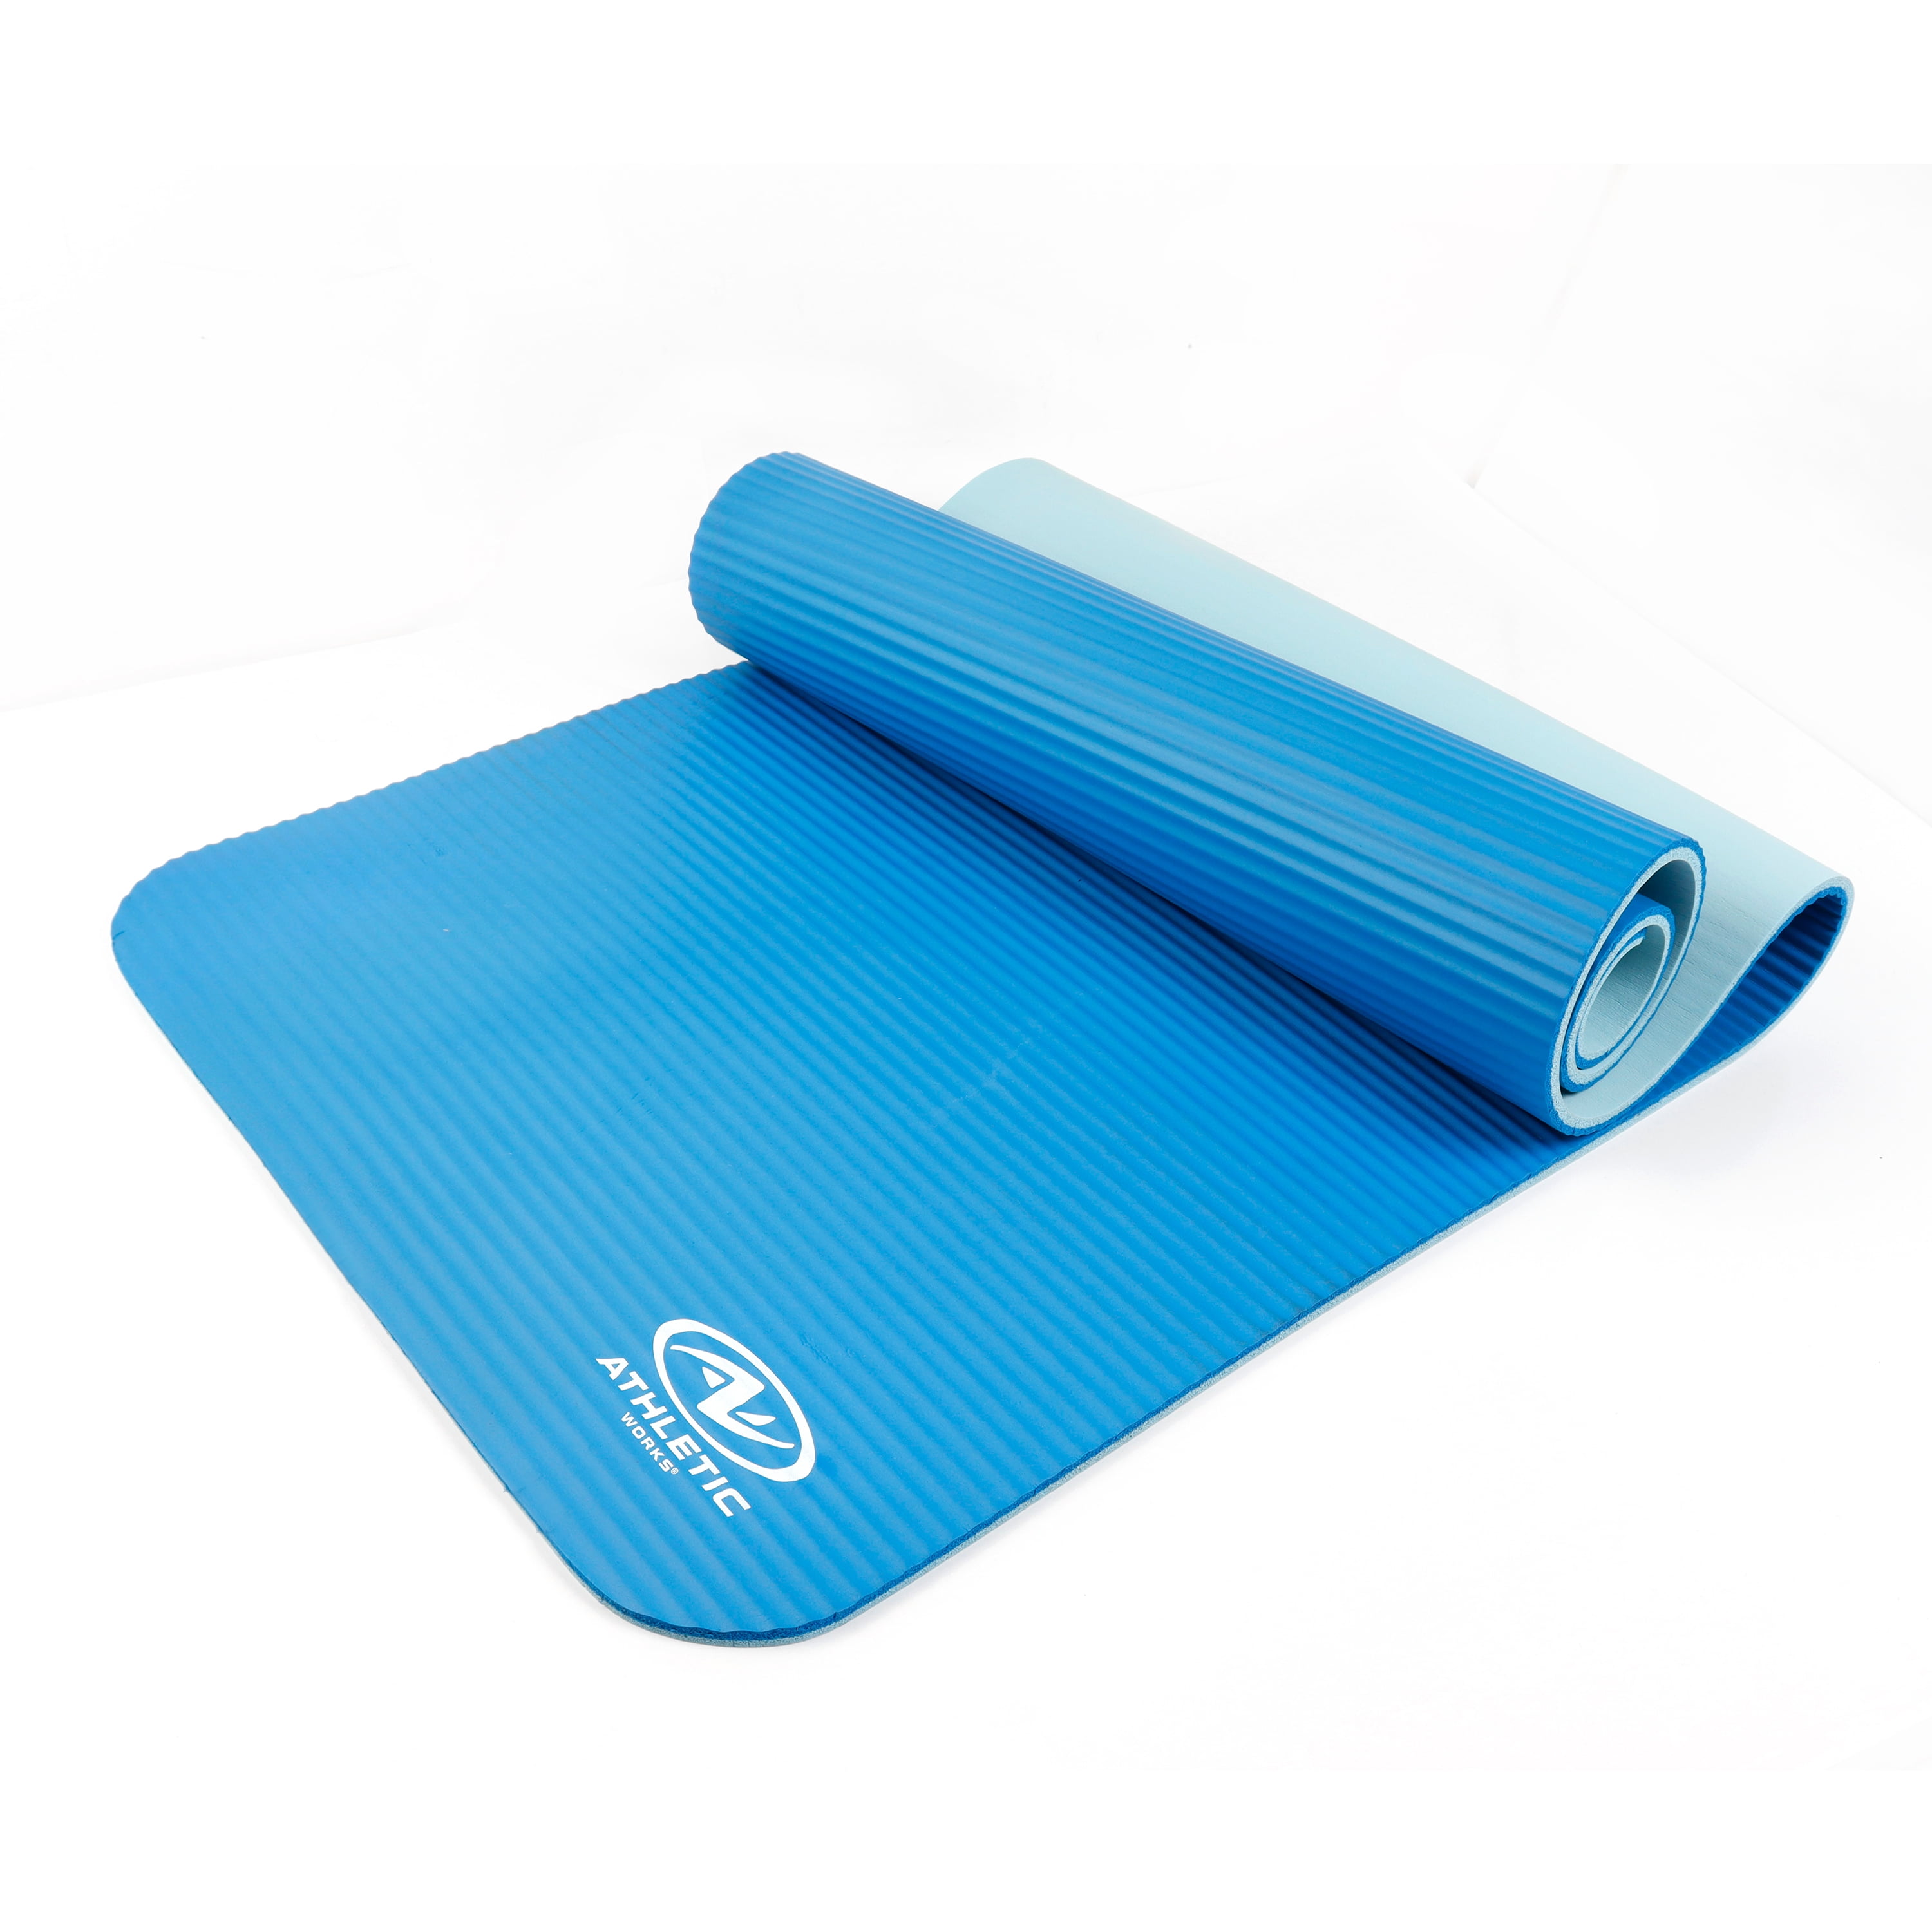 Roll Up Yoga/Fitness/Exercise/Camping Mat Complete With 2 Elastic Straps 